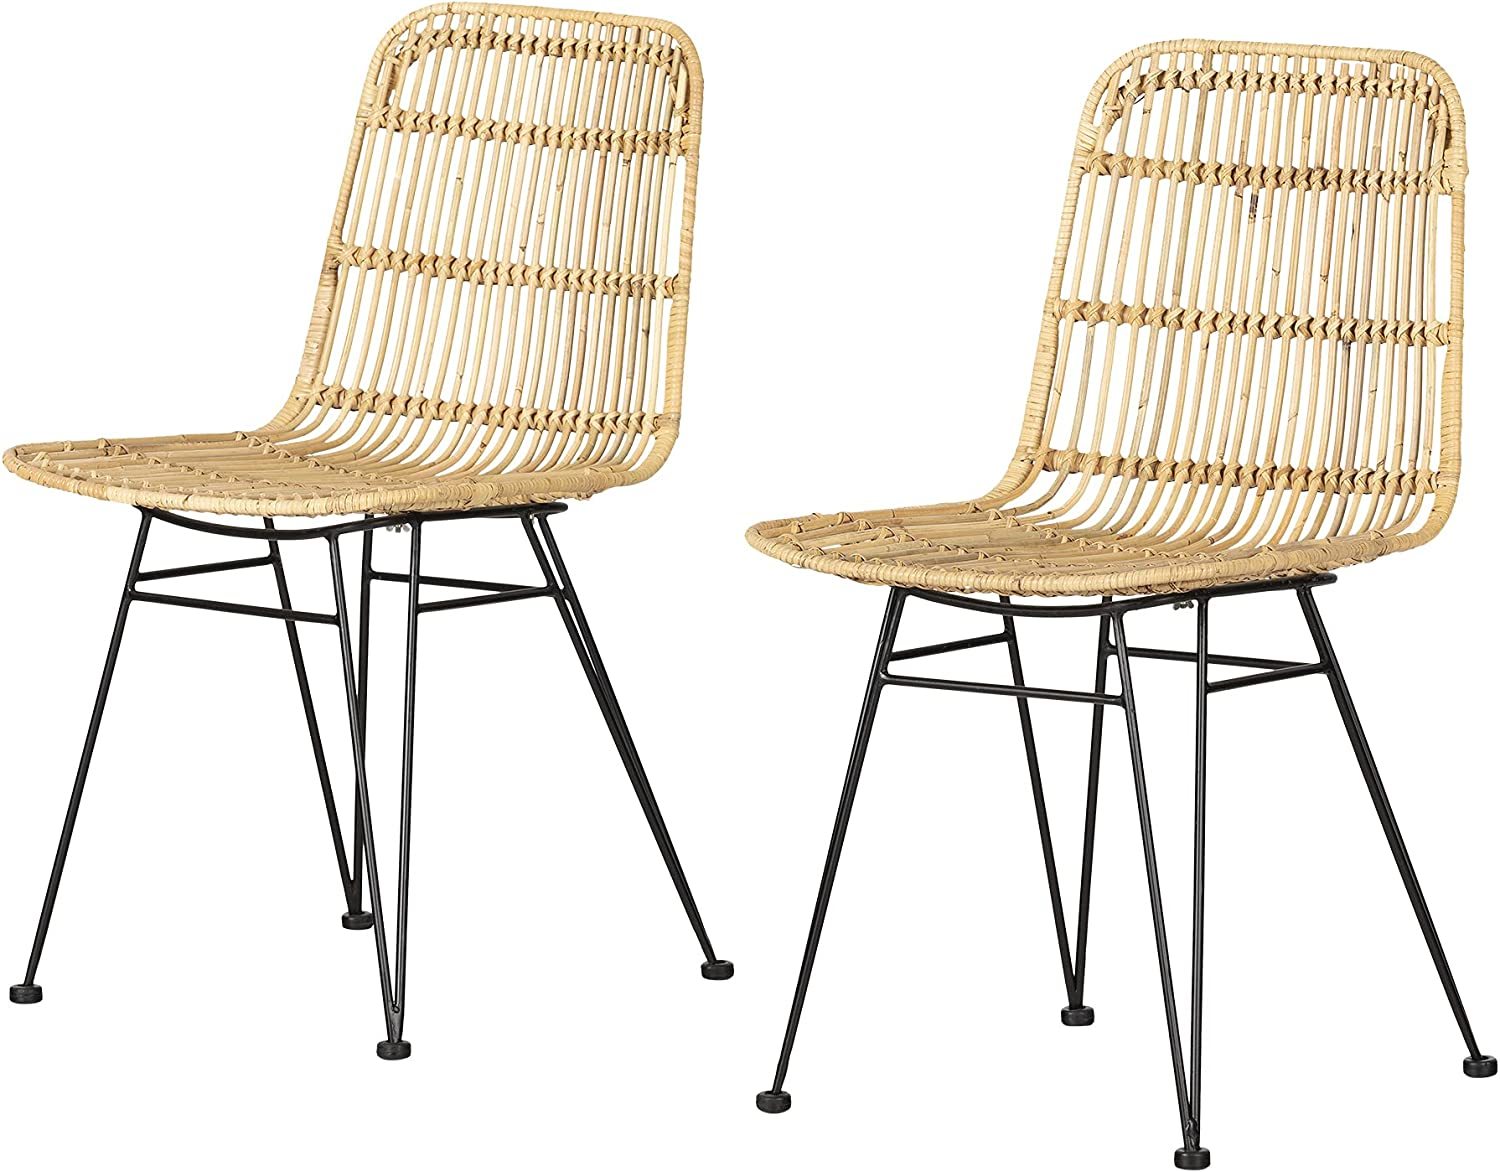 South Shore Balka Rattan Dining Chair, Set of 2 Rattan and, Bohemian Harmony - $249.99